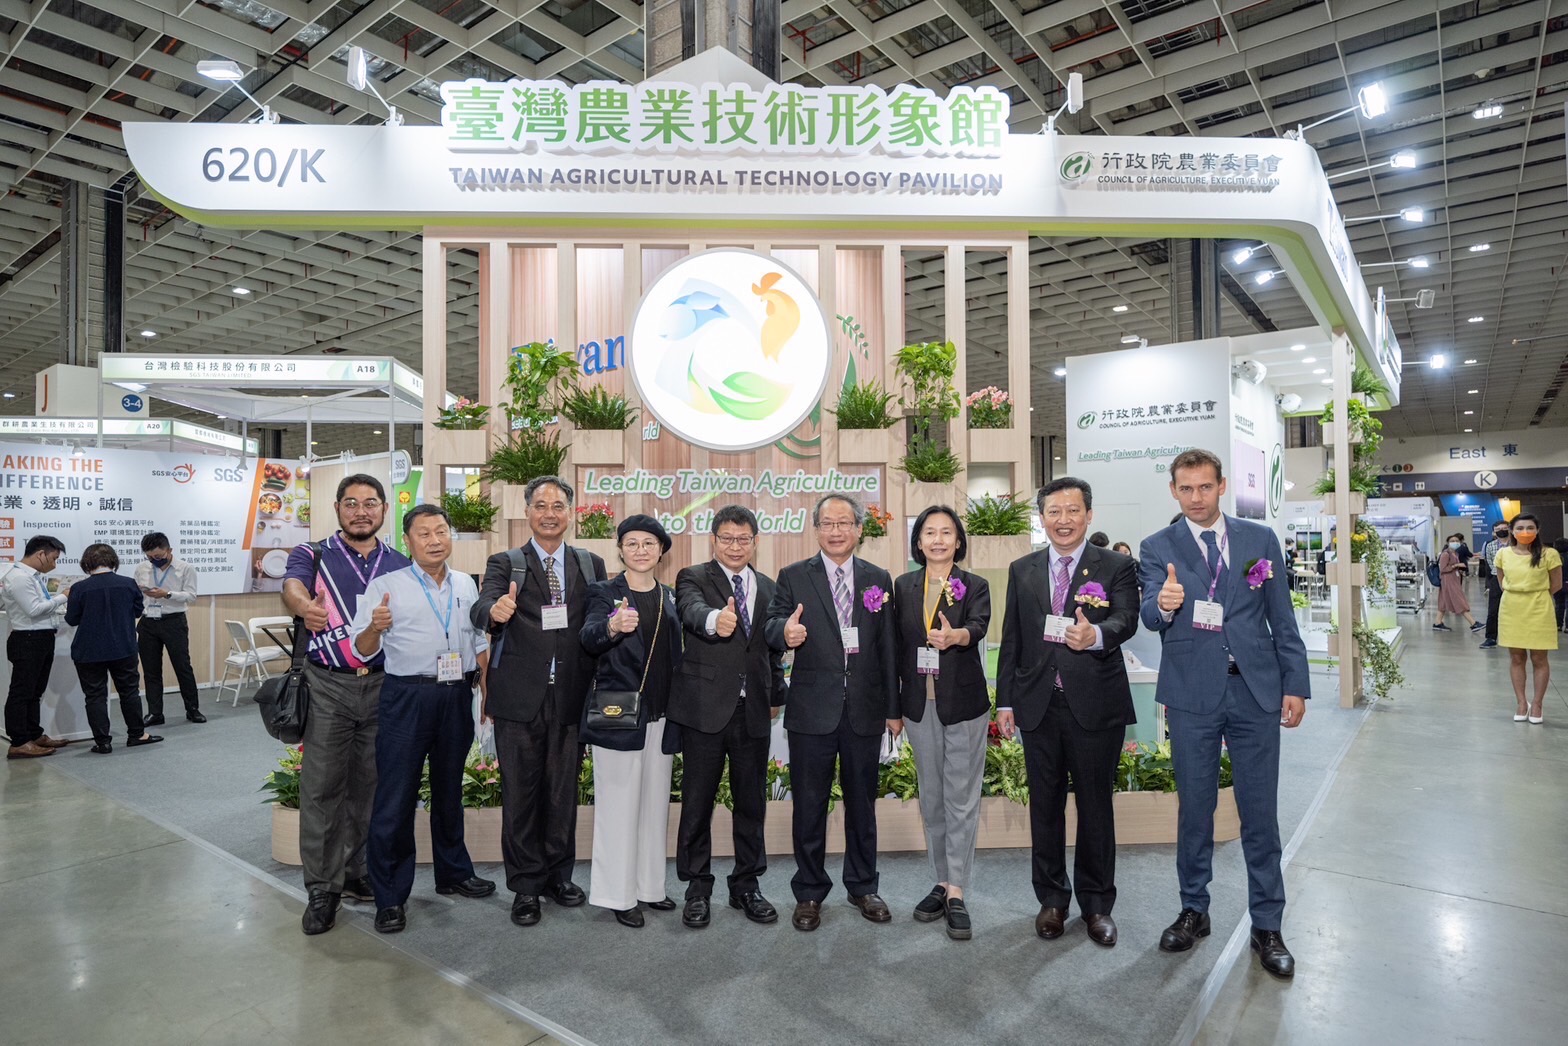 A group photo of the VIP tour at the Asia Agri-Tech Expo & Forum.